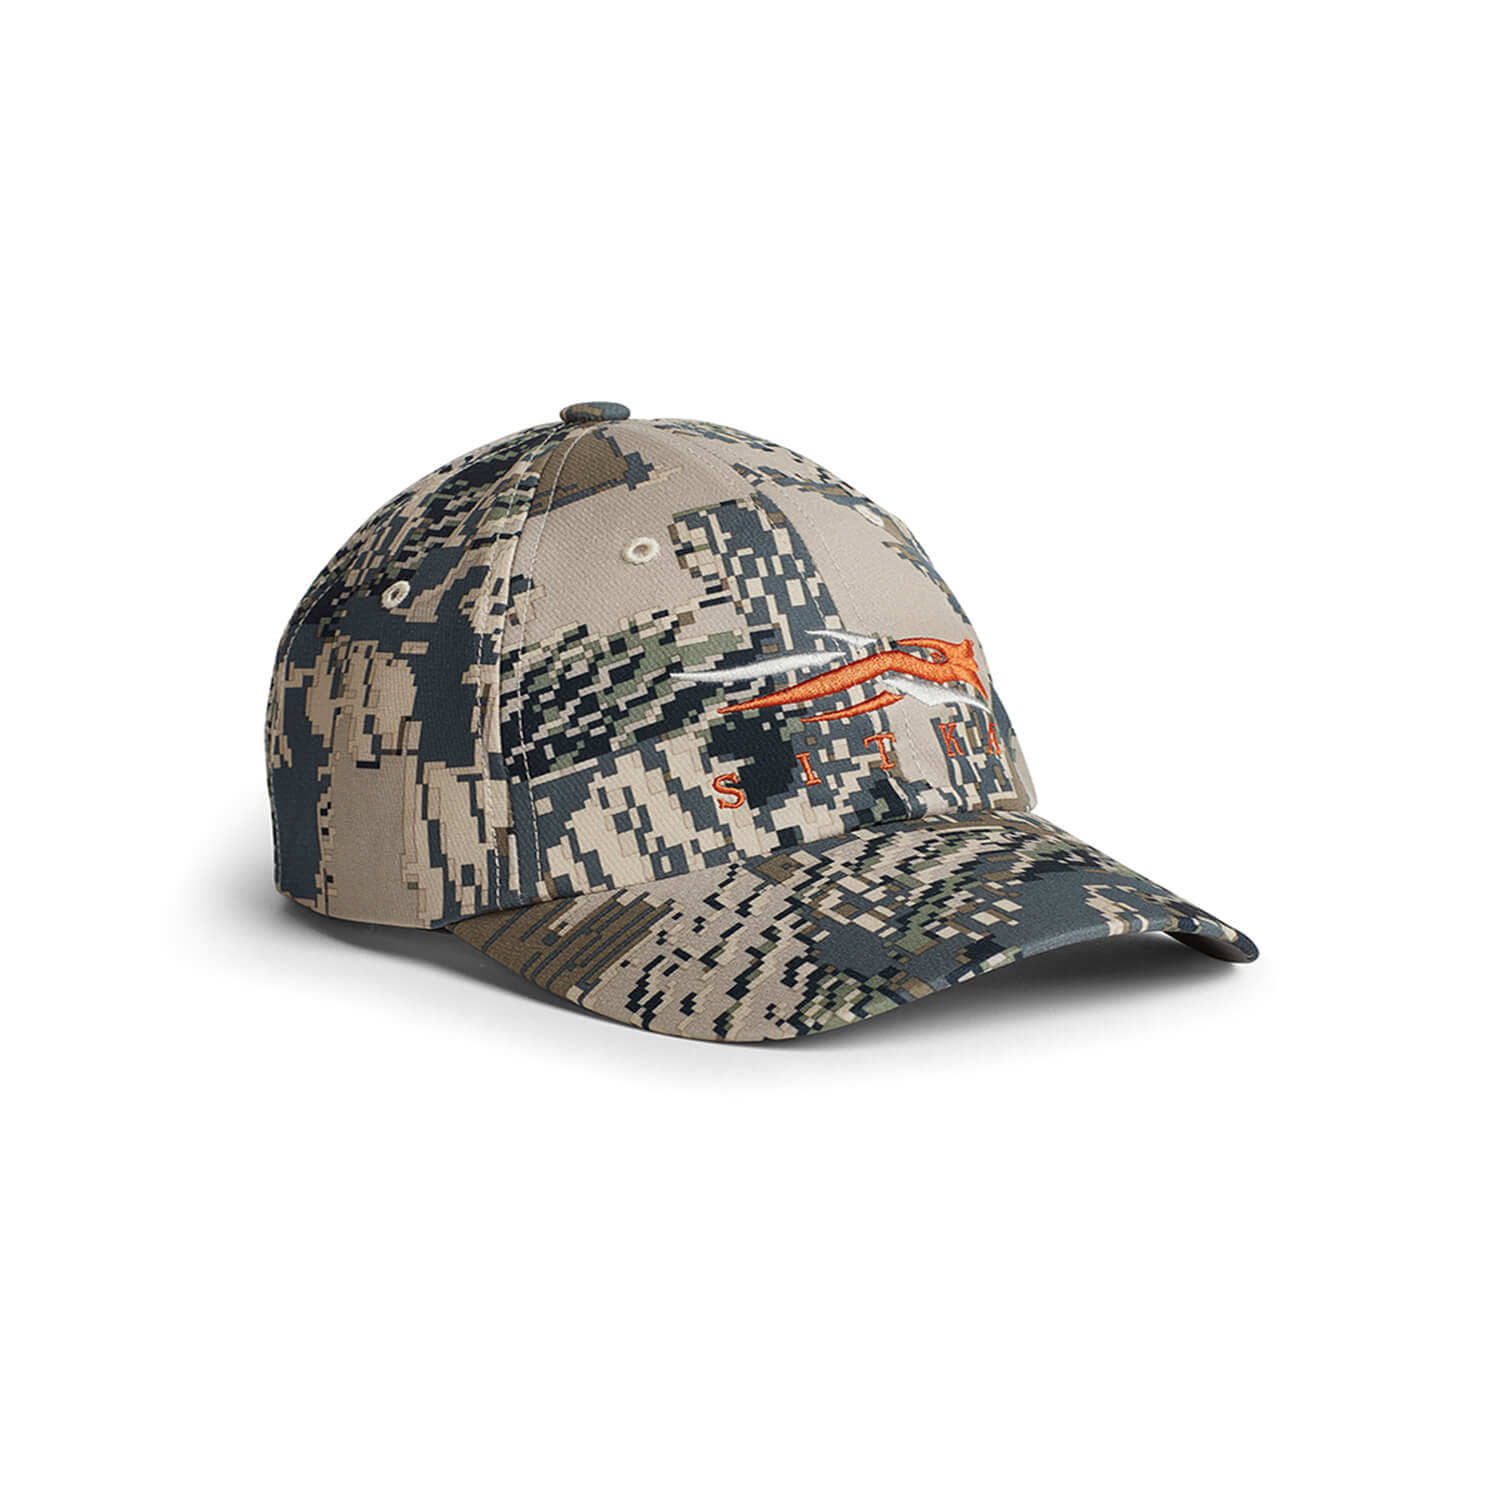 Sitka Gear Cap (Open Country) - Camouflage Caps